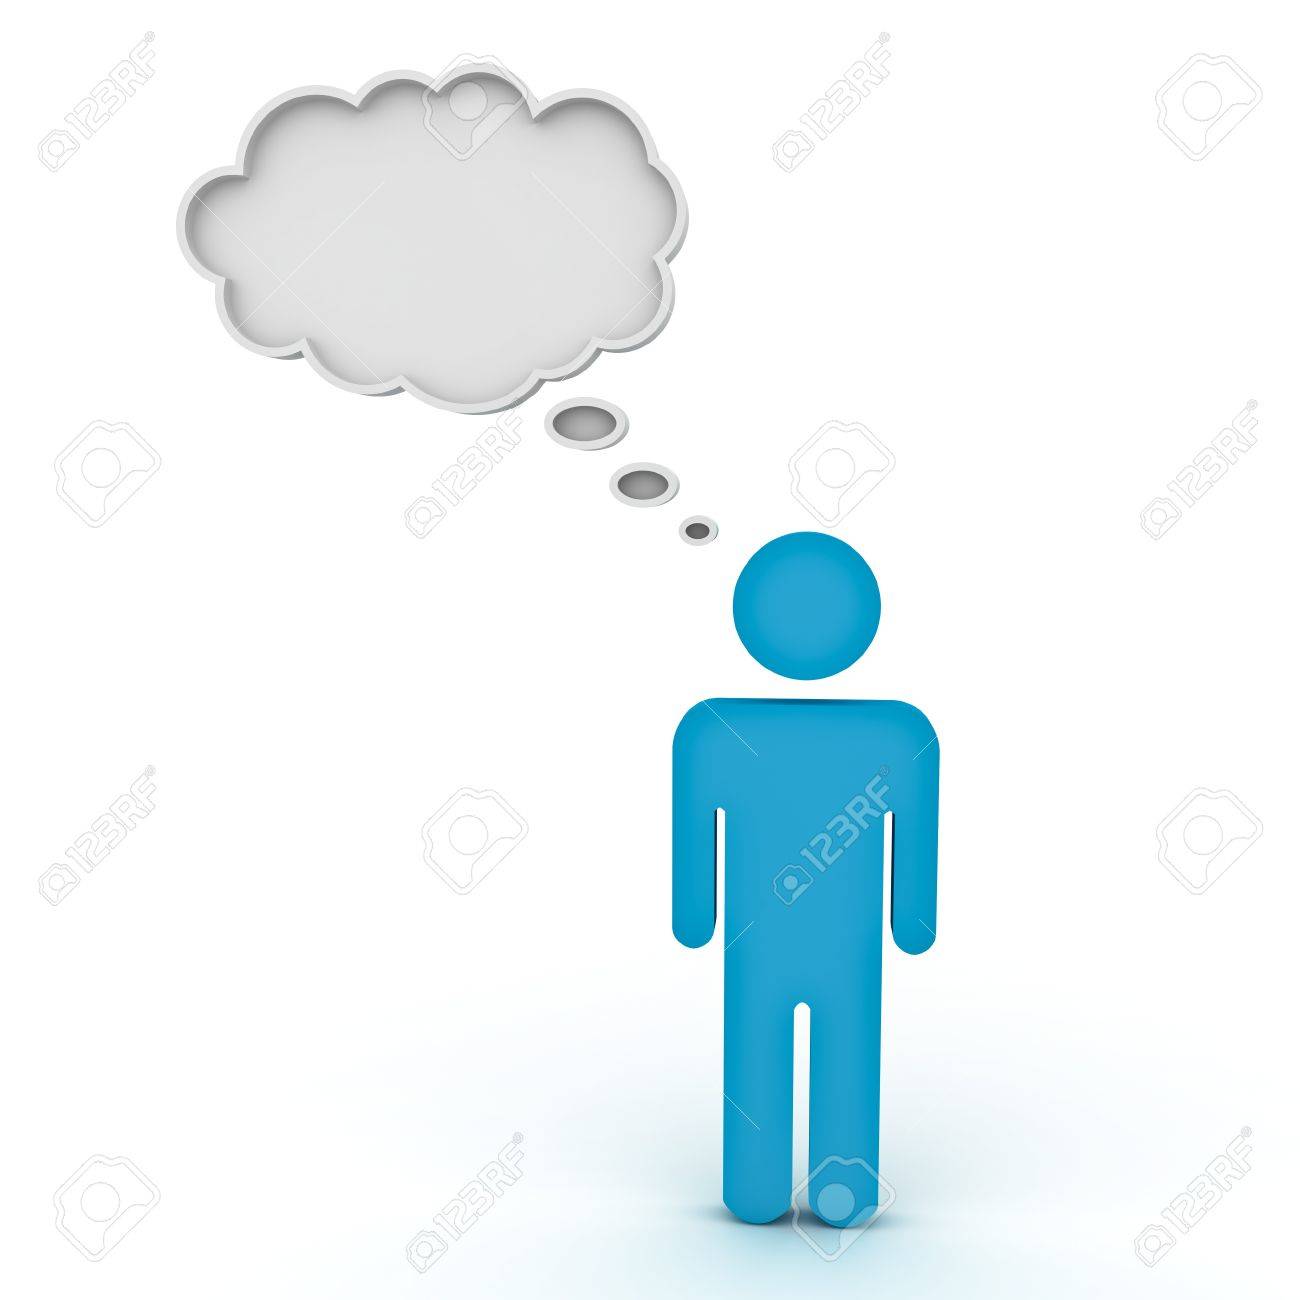 3d Man Symbol Thinking With Thought Bubble Above His Head Over